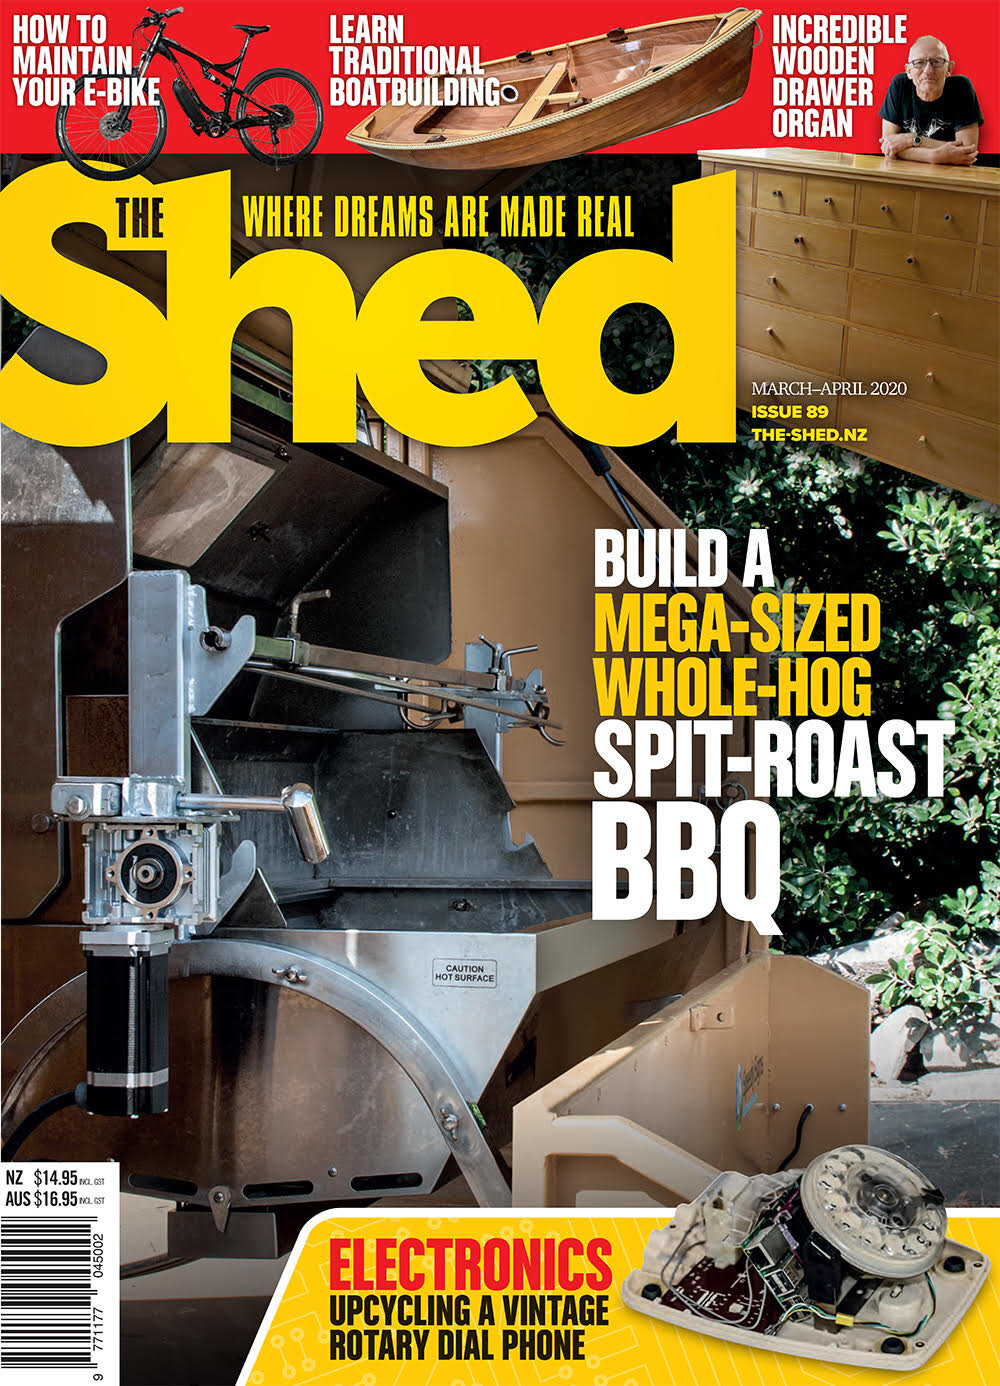 Shed 89 cover.jpg